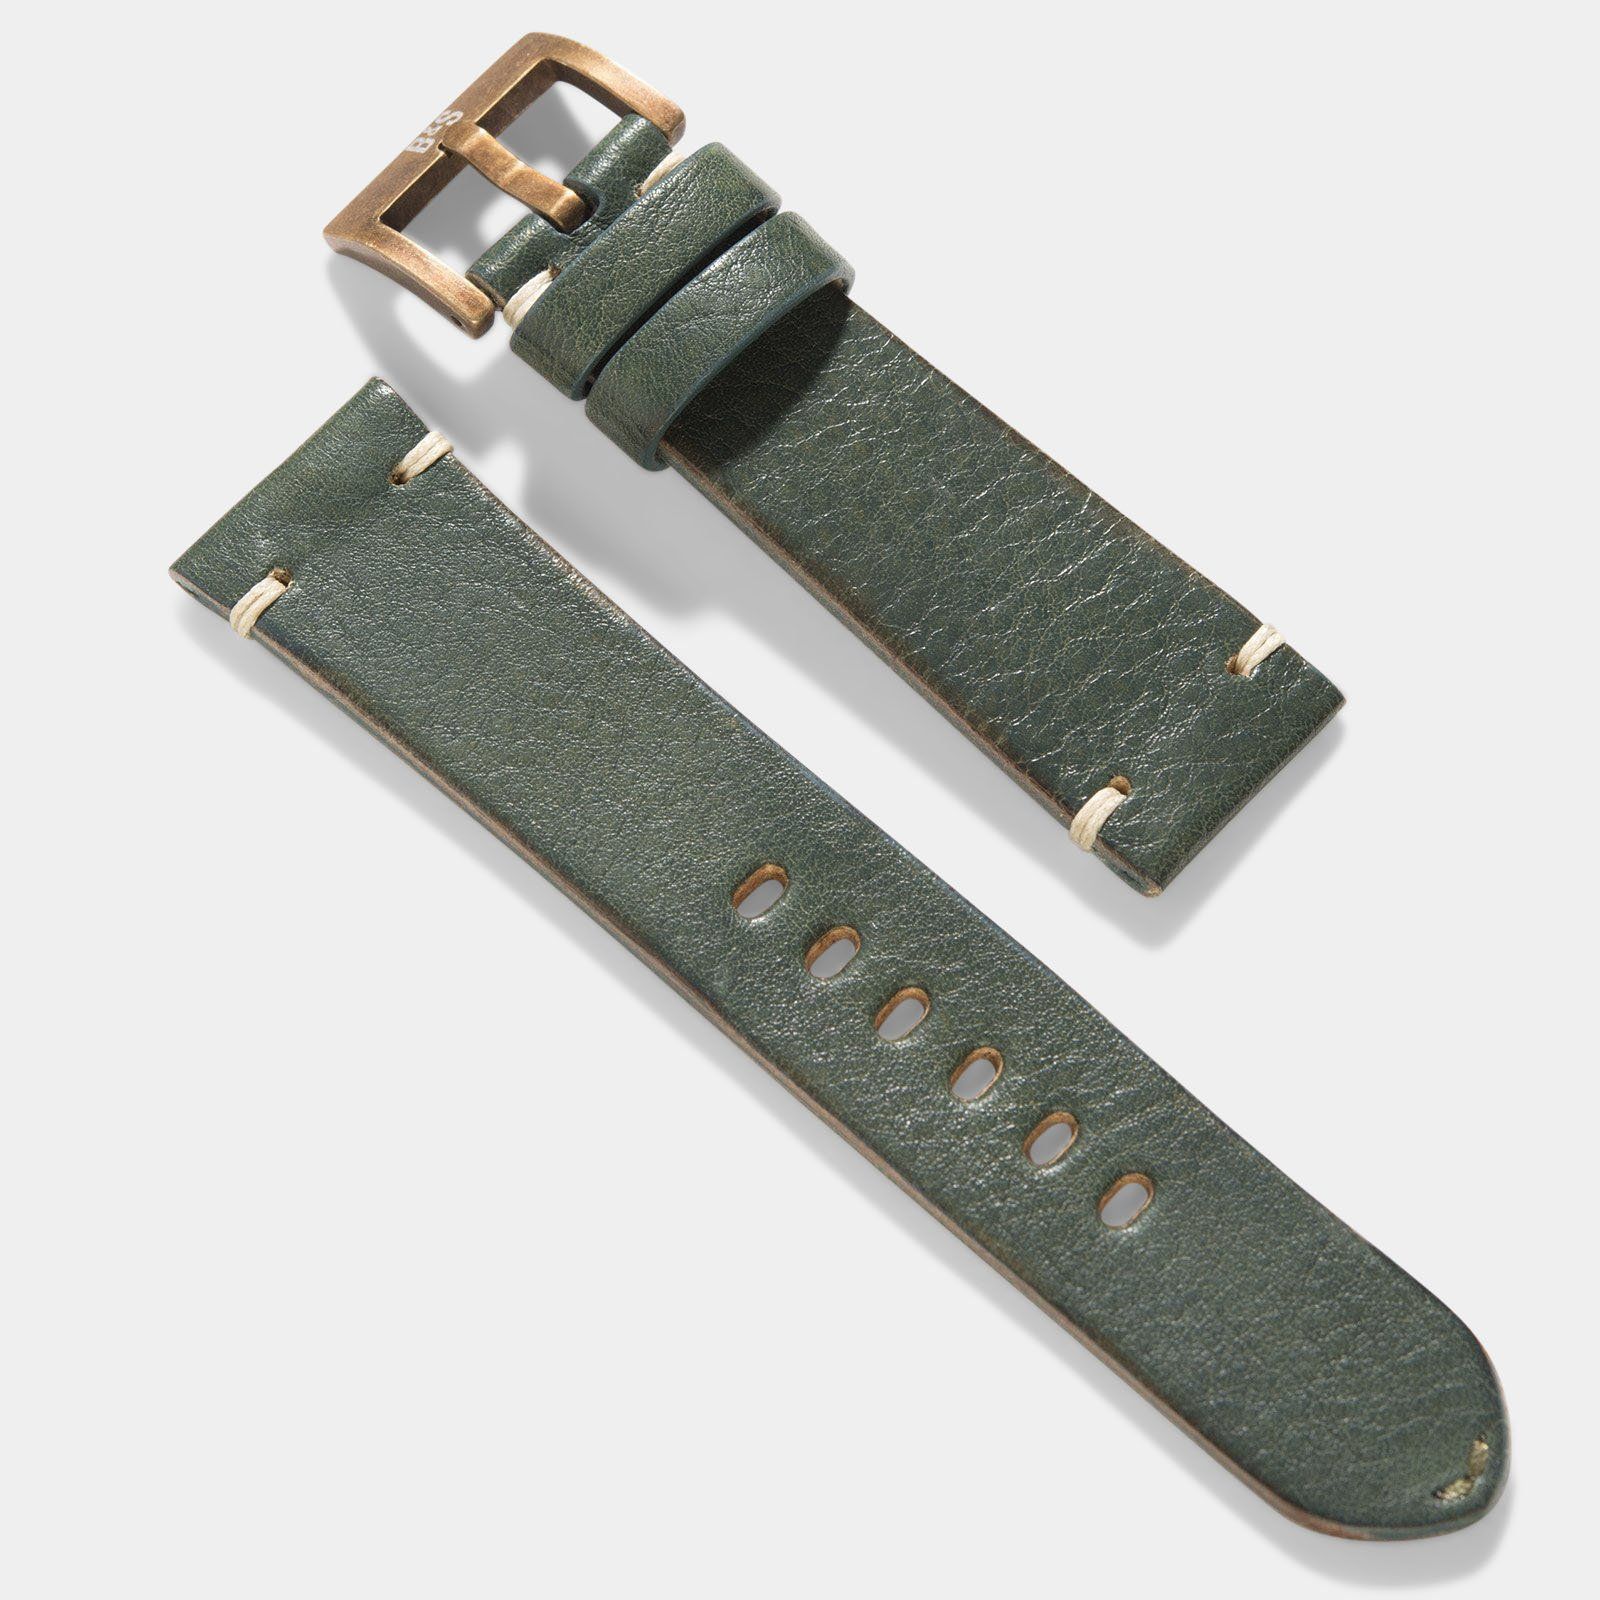 Strap for Tudor Black Bay Bronze - Perfect Match Vintage Green Leather Watch Strap